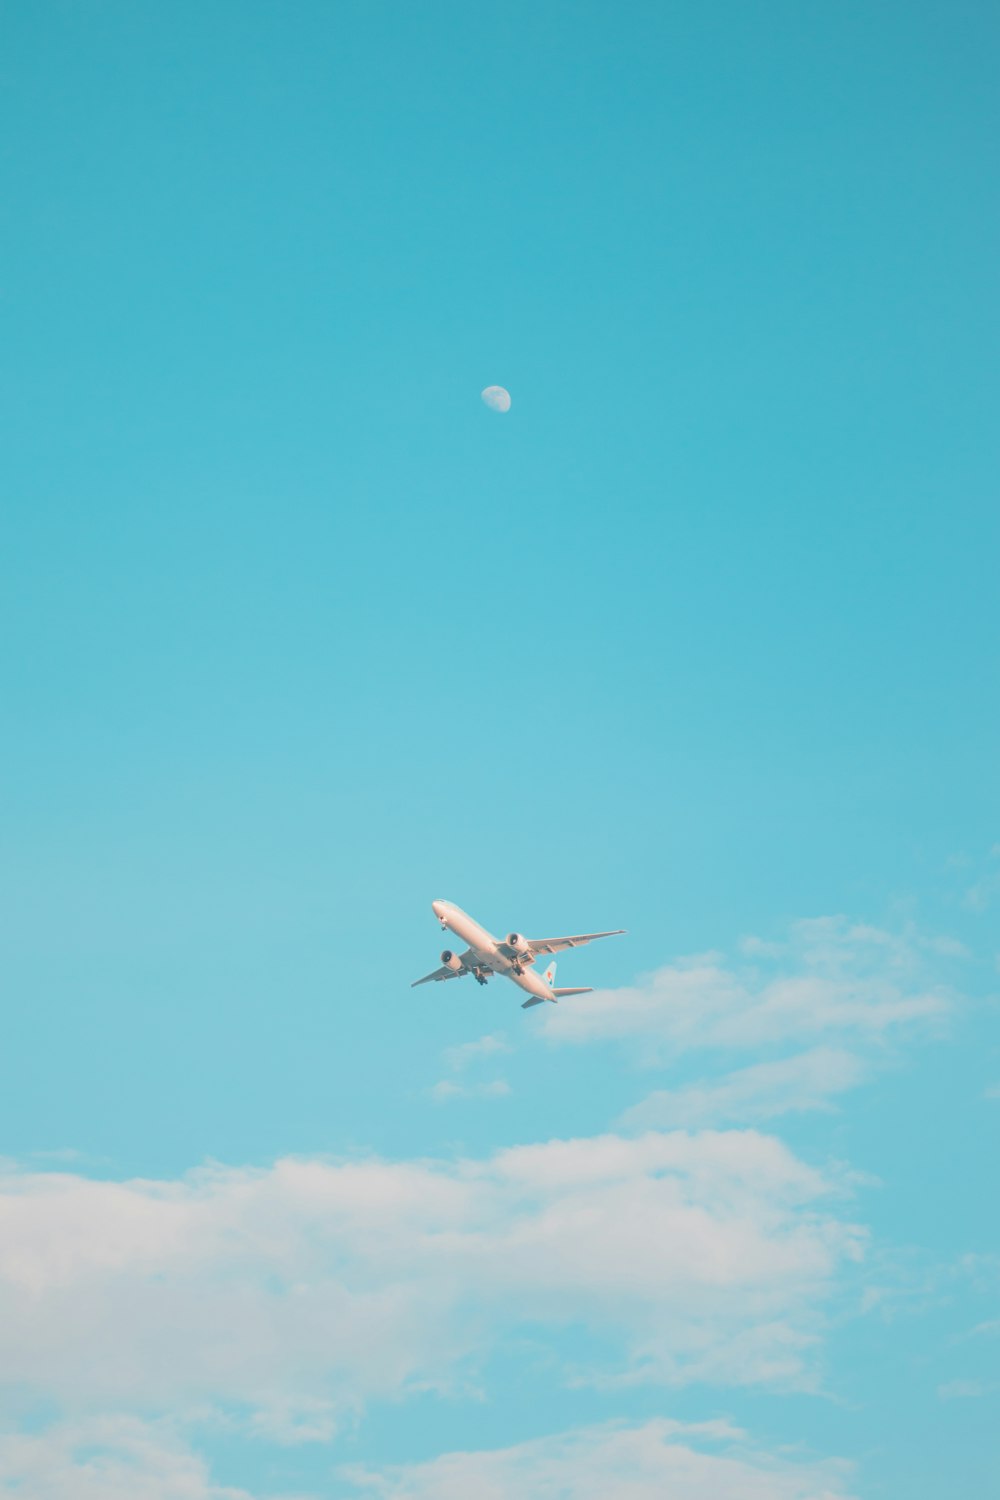 an airplane flying in the sky with a moon in the background